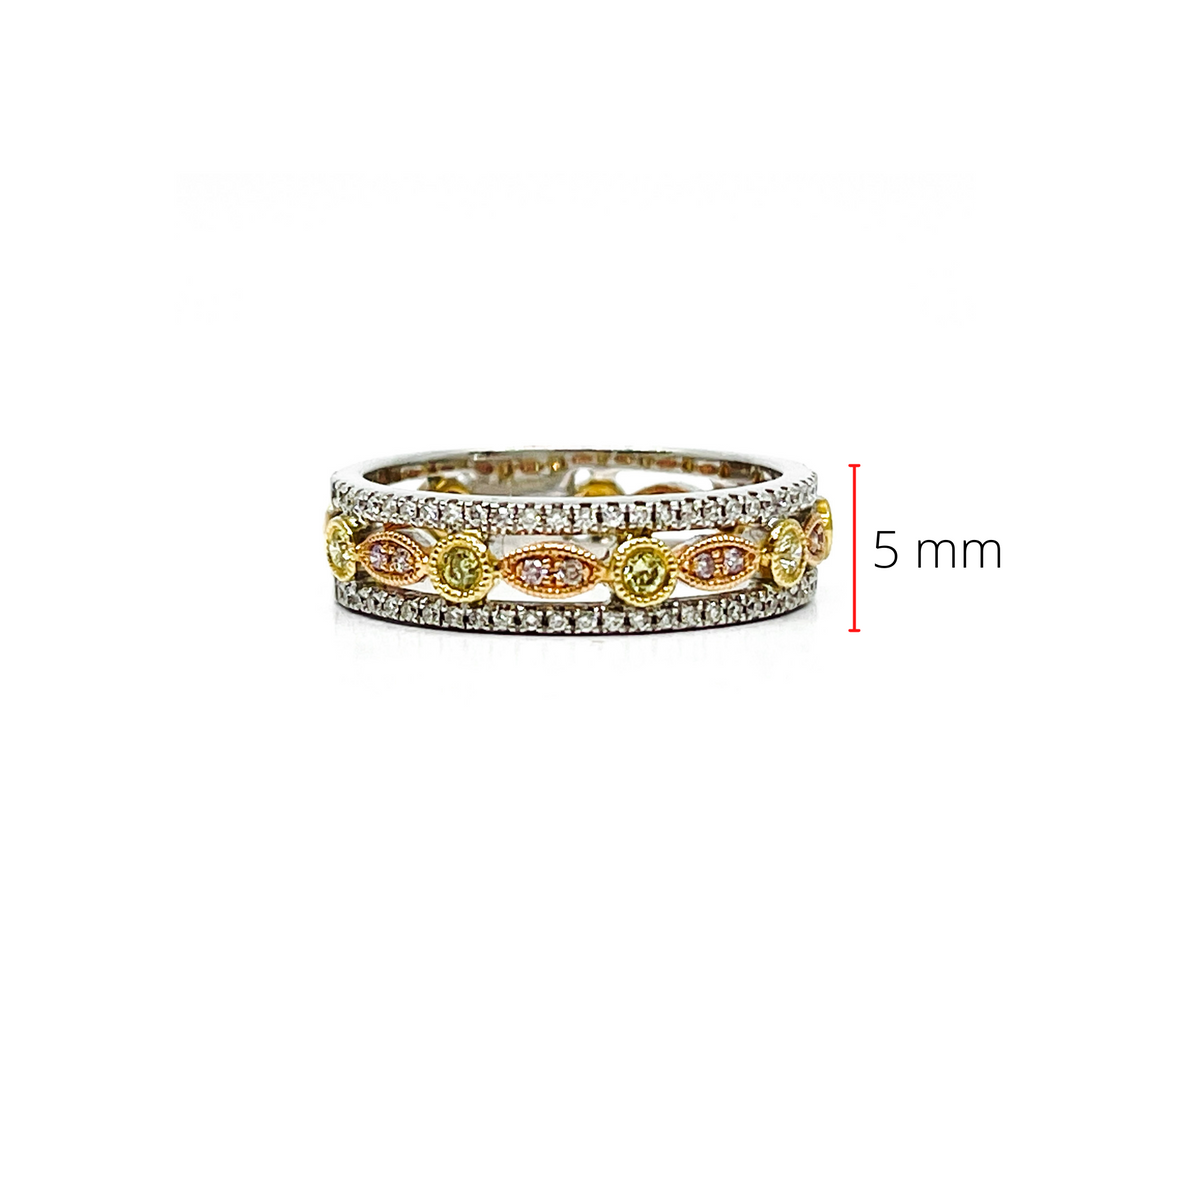 14K White Gold 0.31cttw Yellow, Pink and White Diamond Ring - Size 6.5